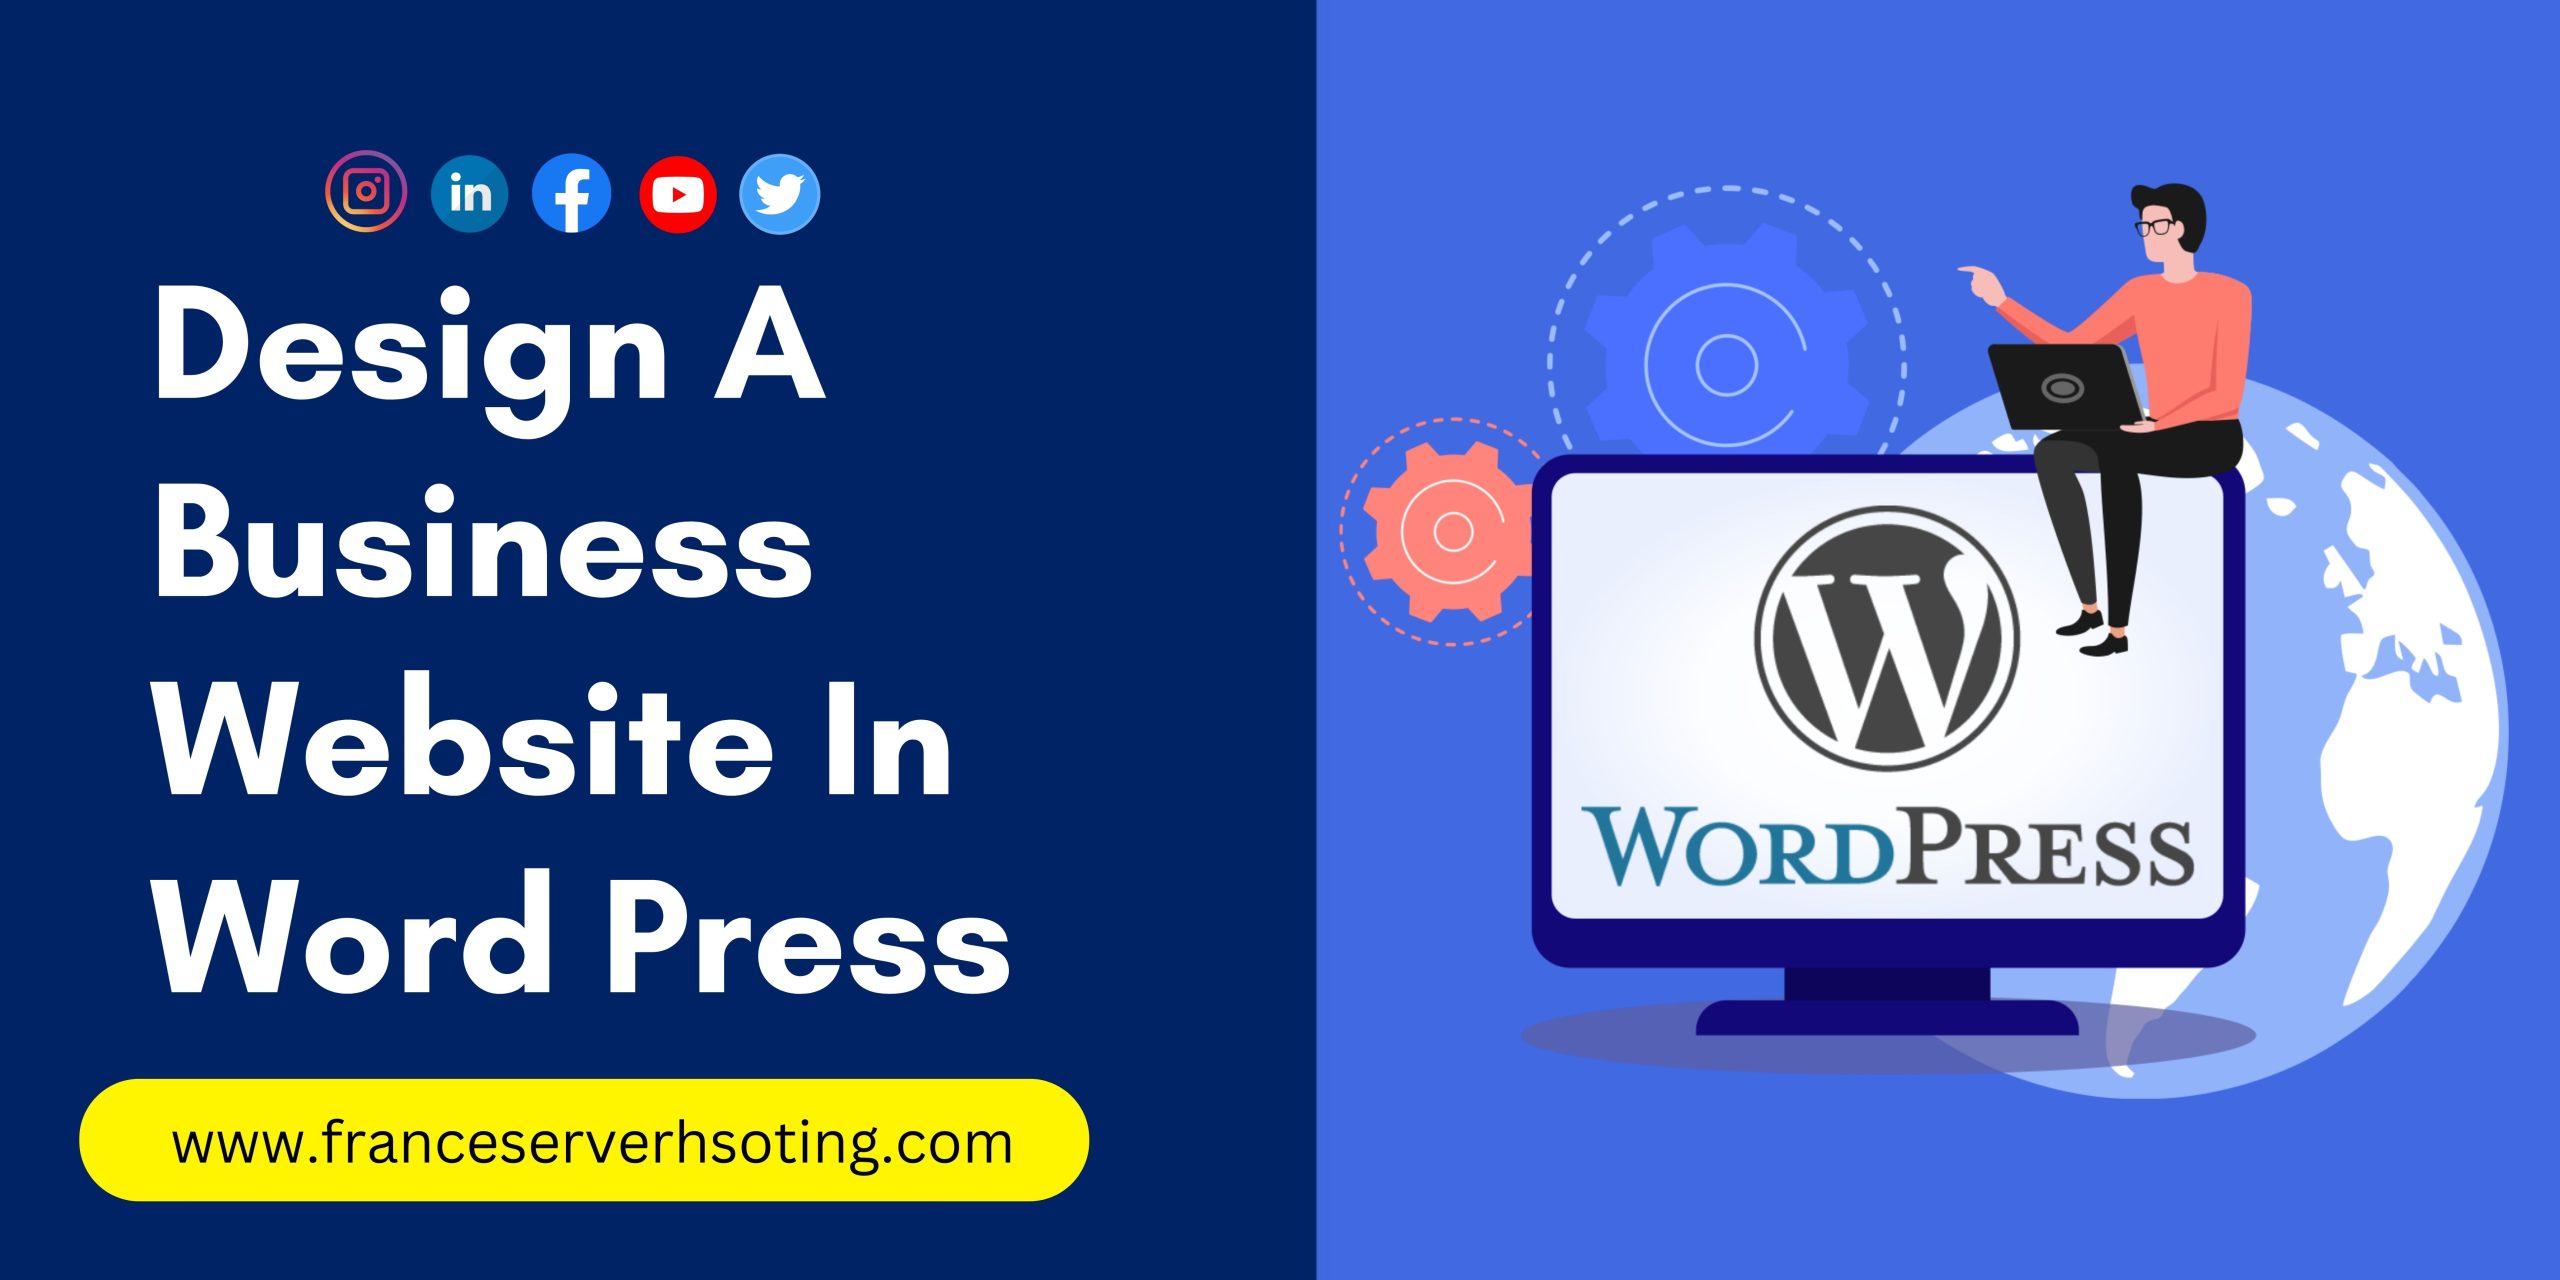 Create your own professional website with WordPress